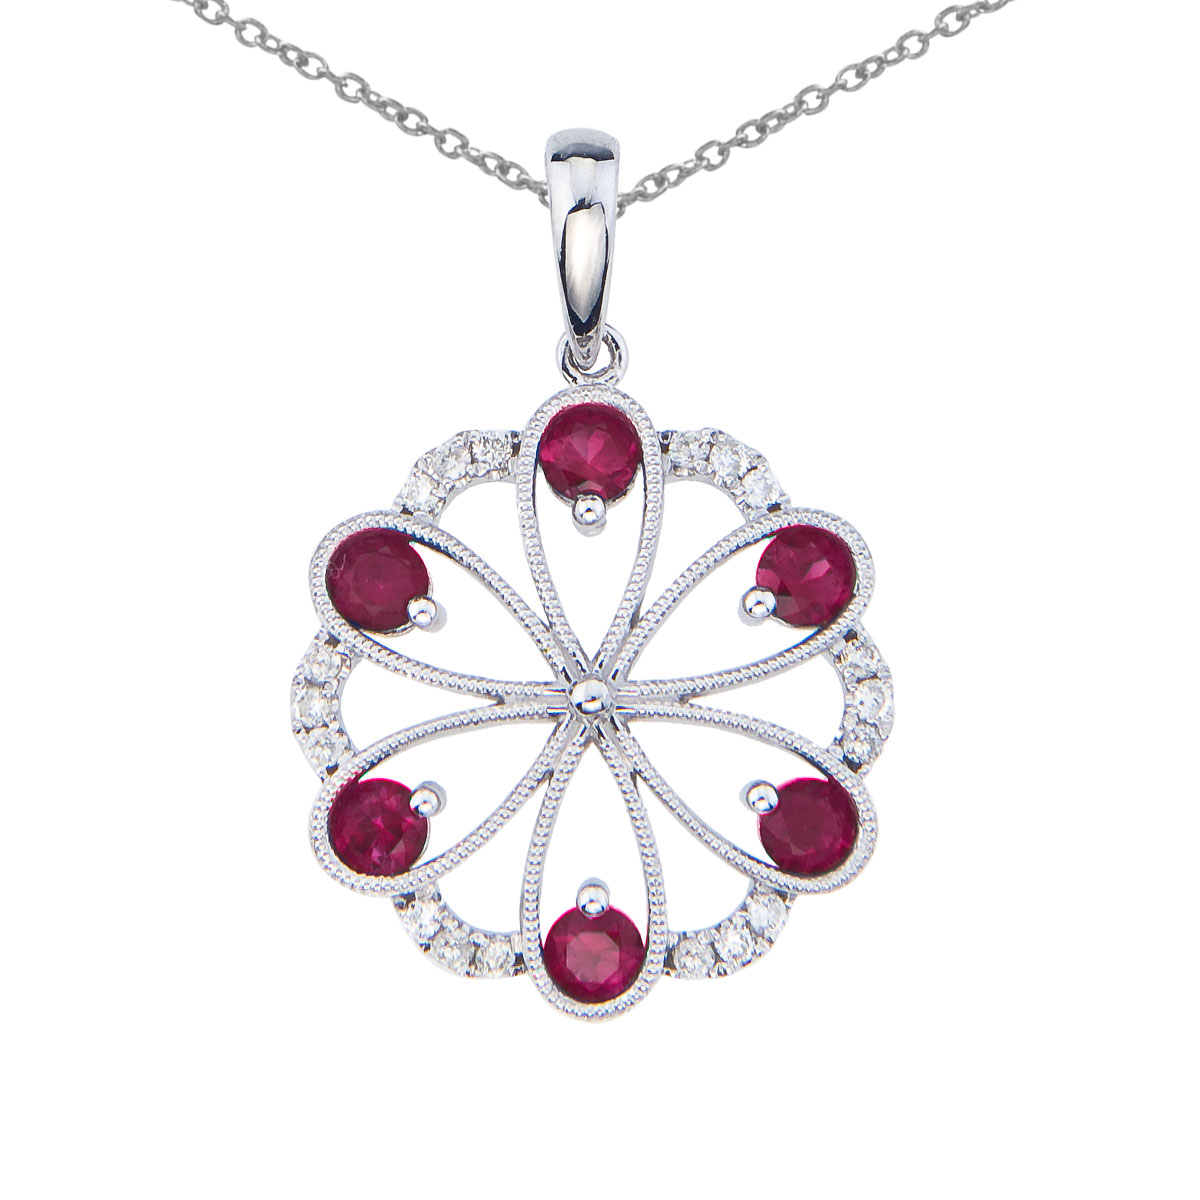 JCX2561: Beautiful floral pendant set in 14k white gold with 6 dazzling rubies and .14 total carats of bright diamonds.